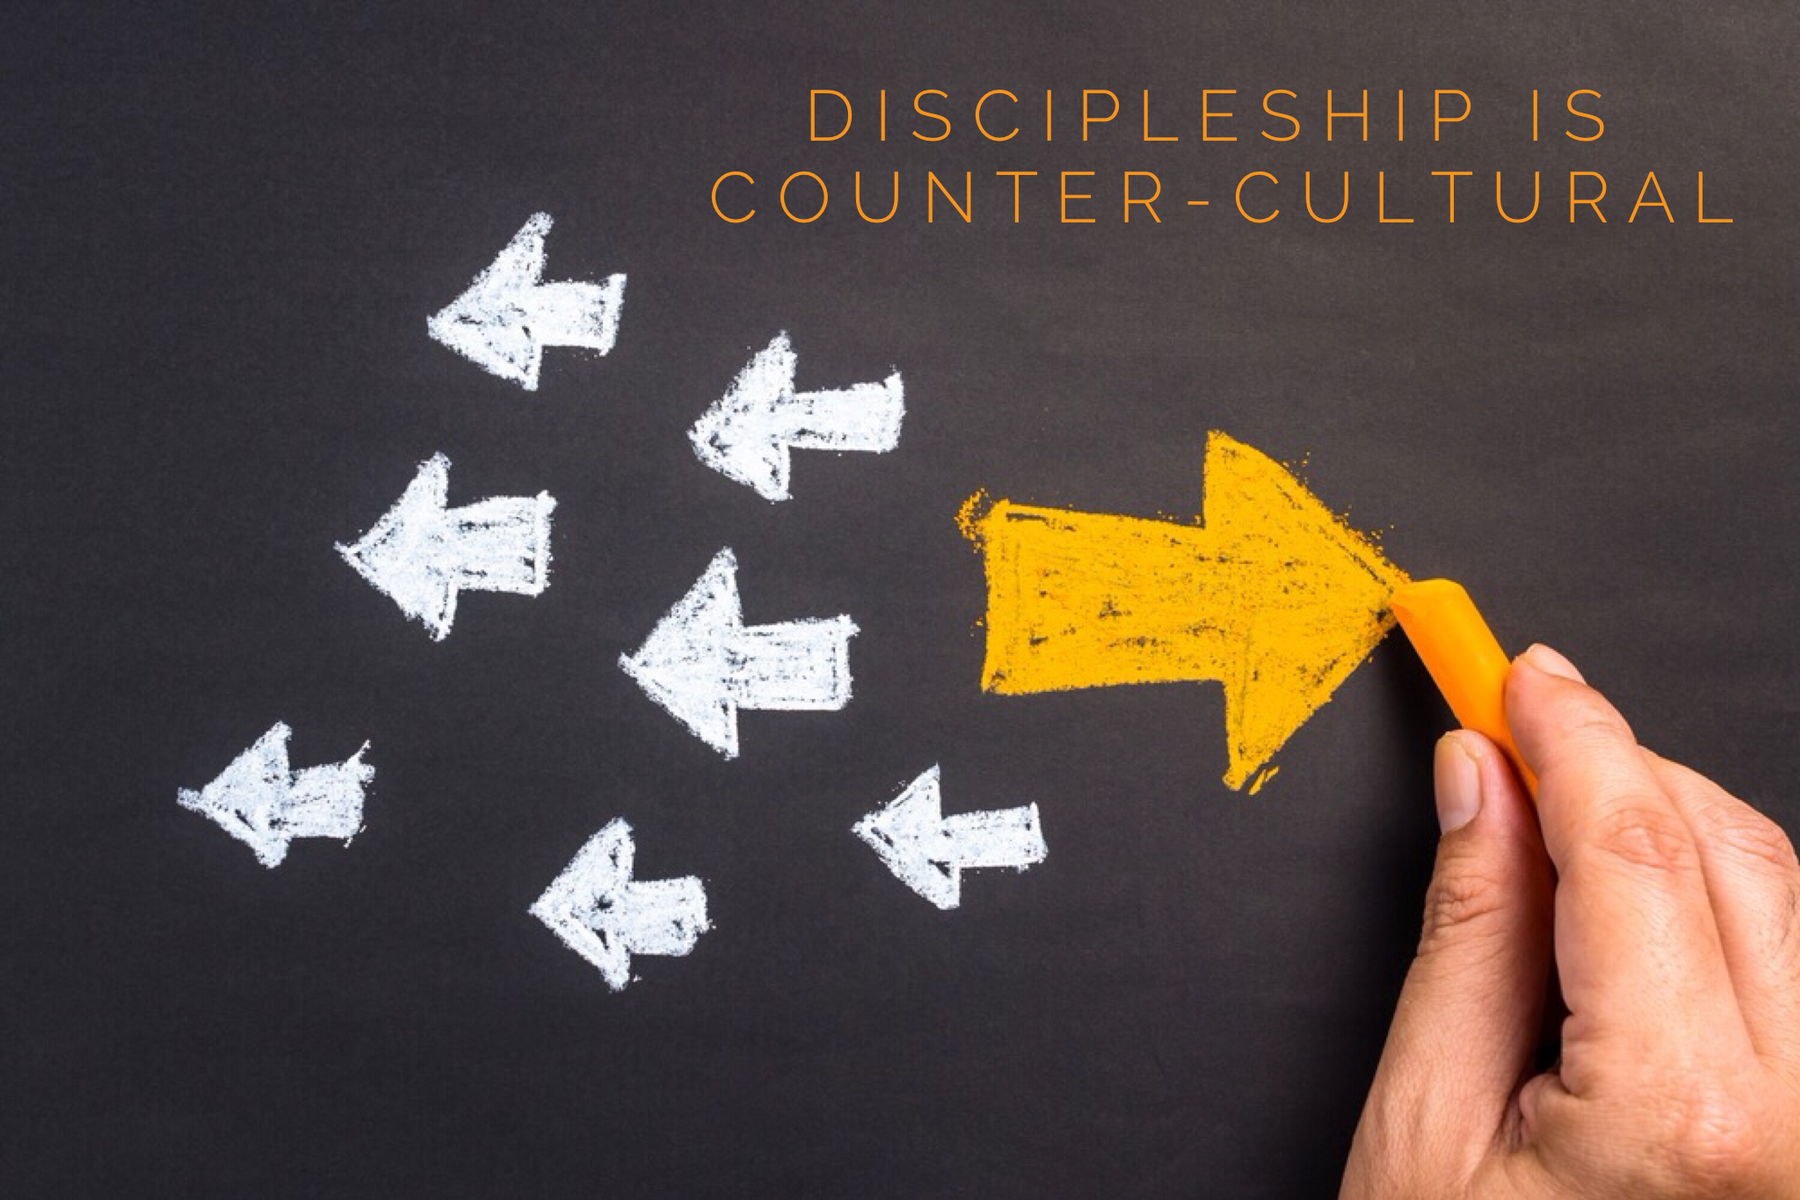 Jesus Knew Disciple Making Was Counter-Cultural. Do We?